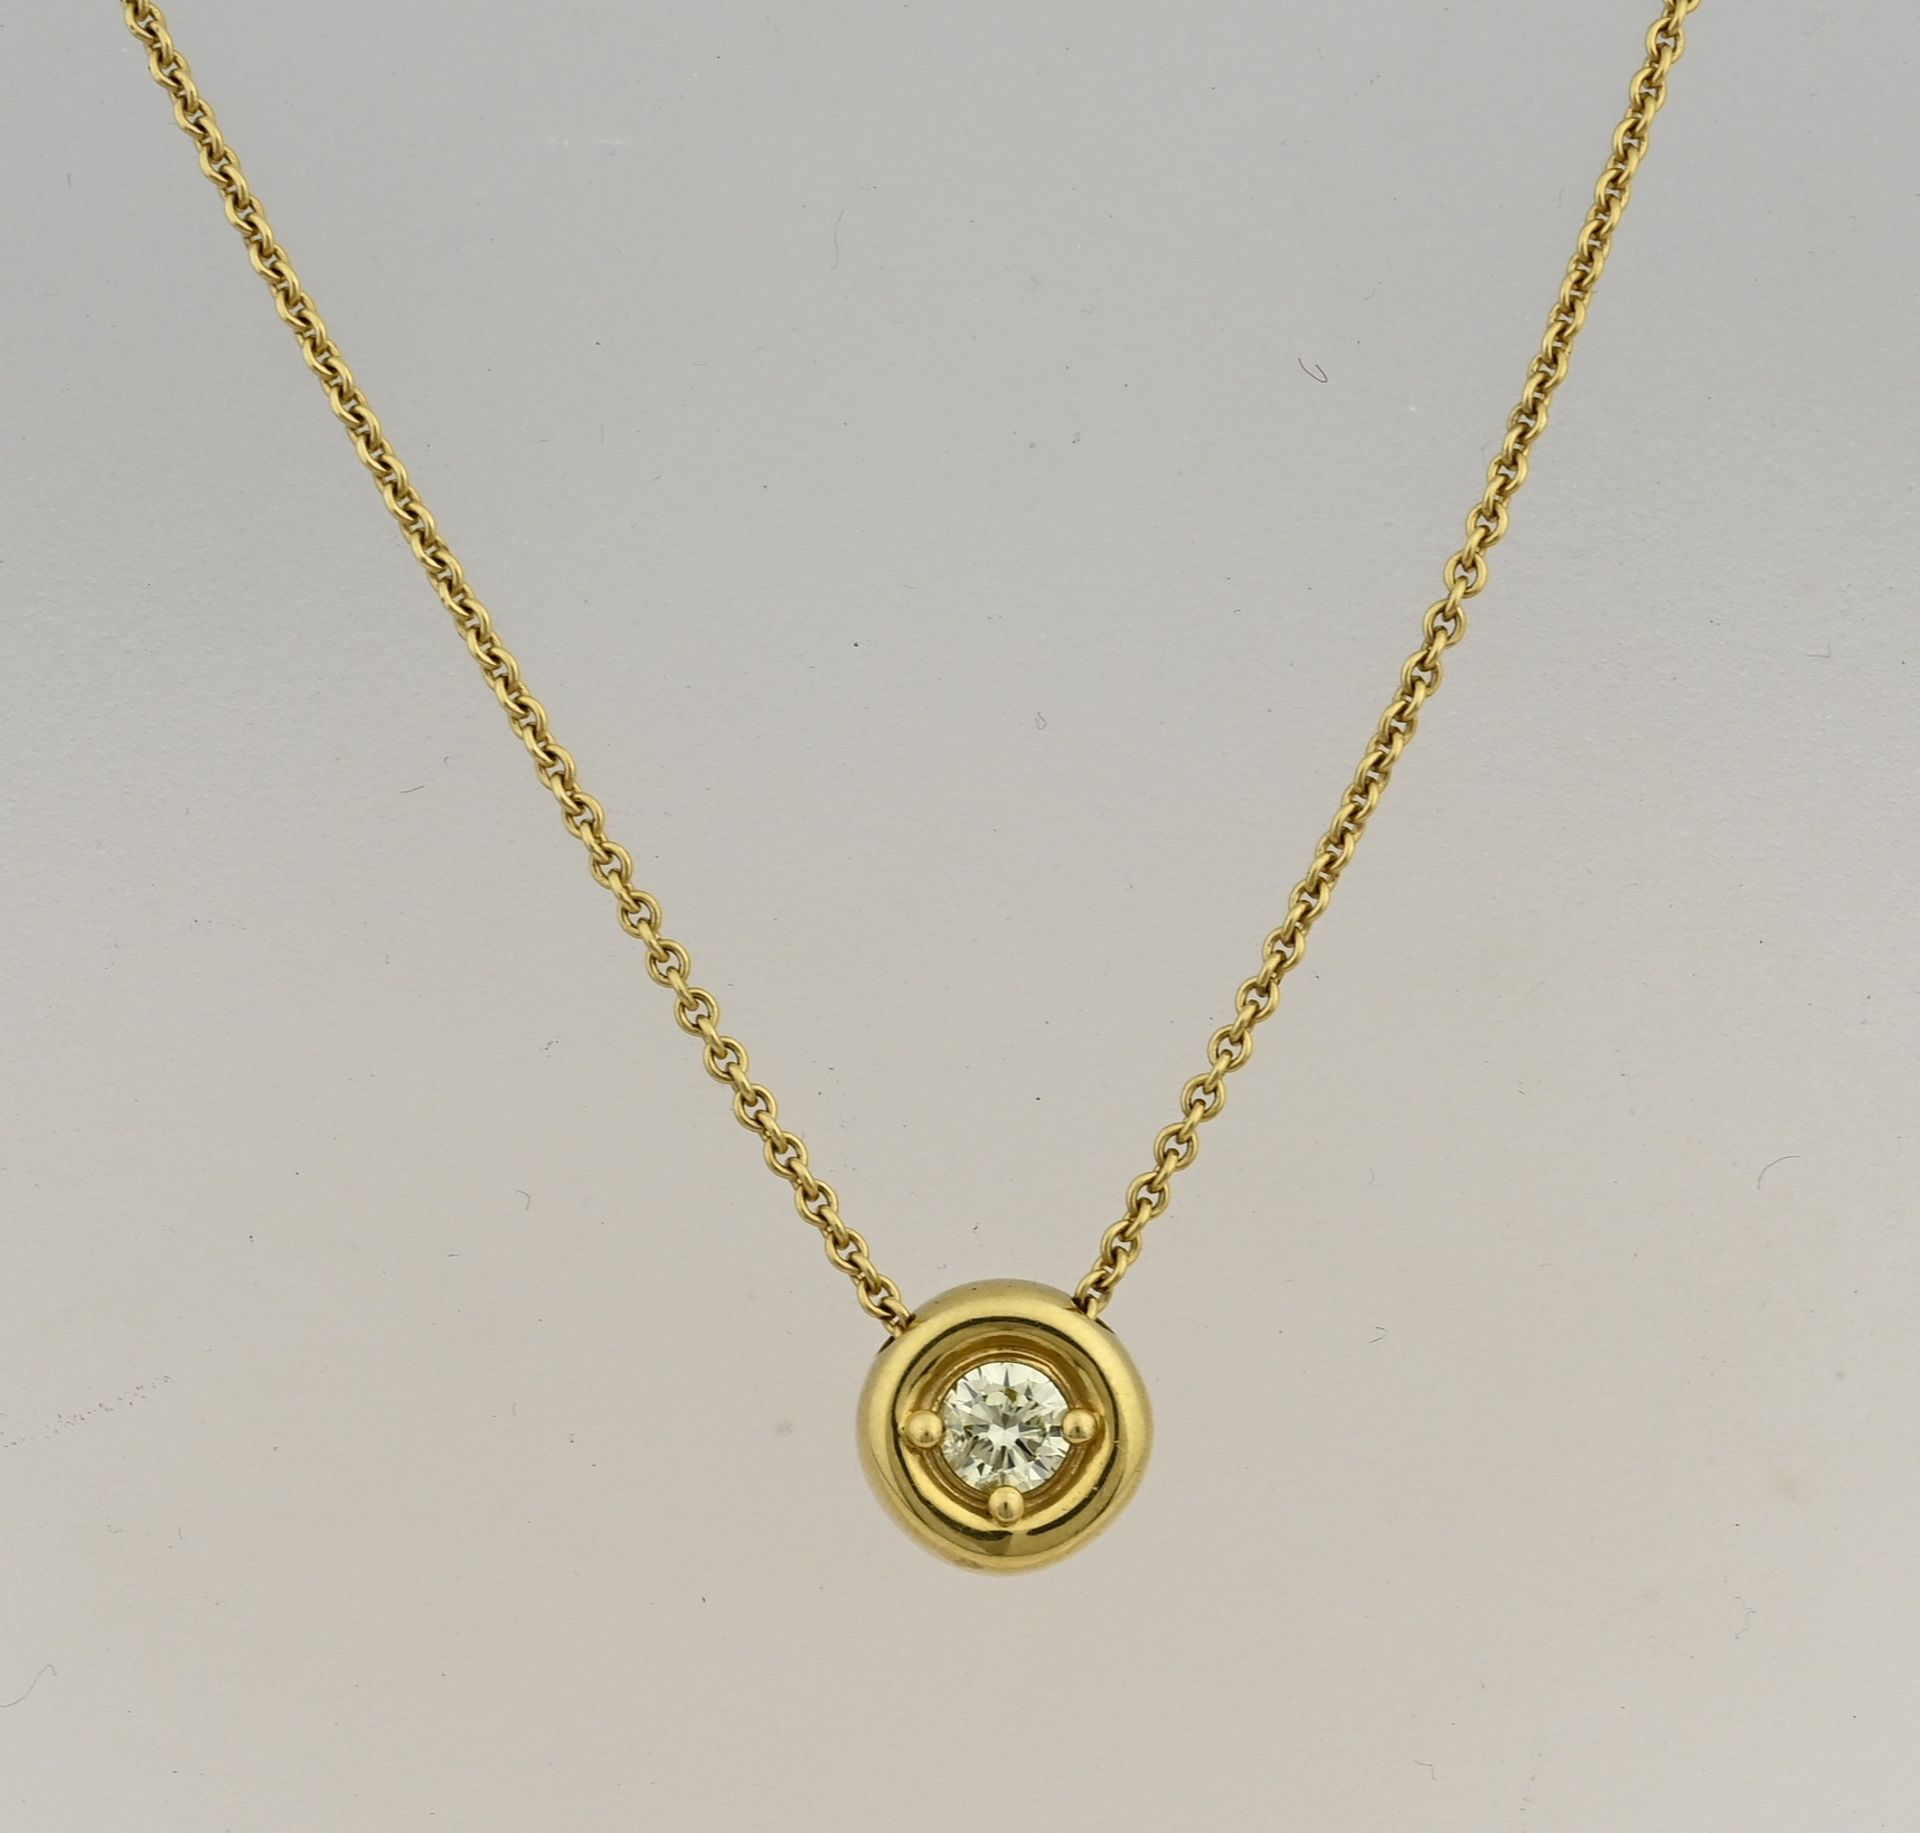 Gold necklace with diamond